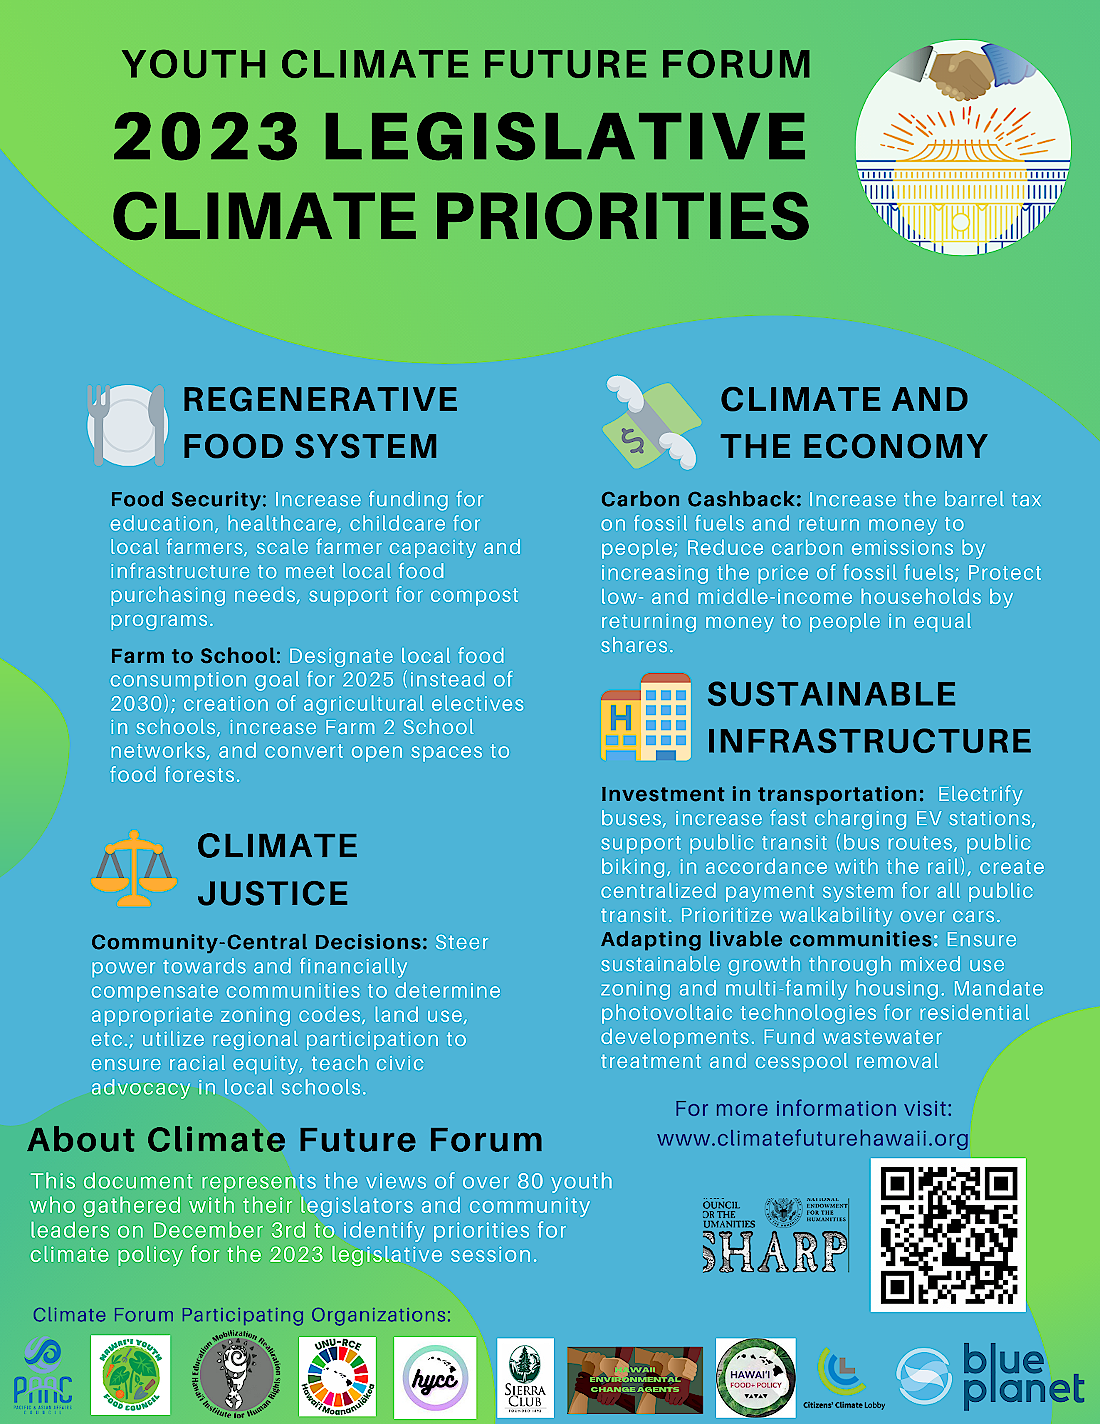 2023 legislative priorities outlined by the Hawaii Youth Climate Future Forum held on December 3, 2022